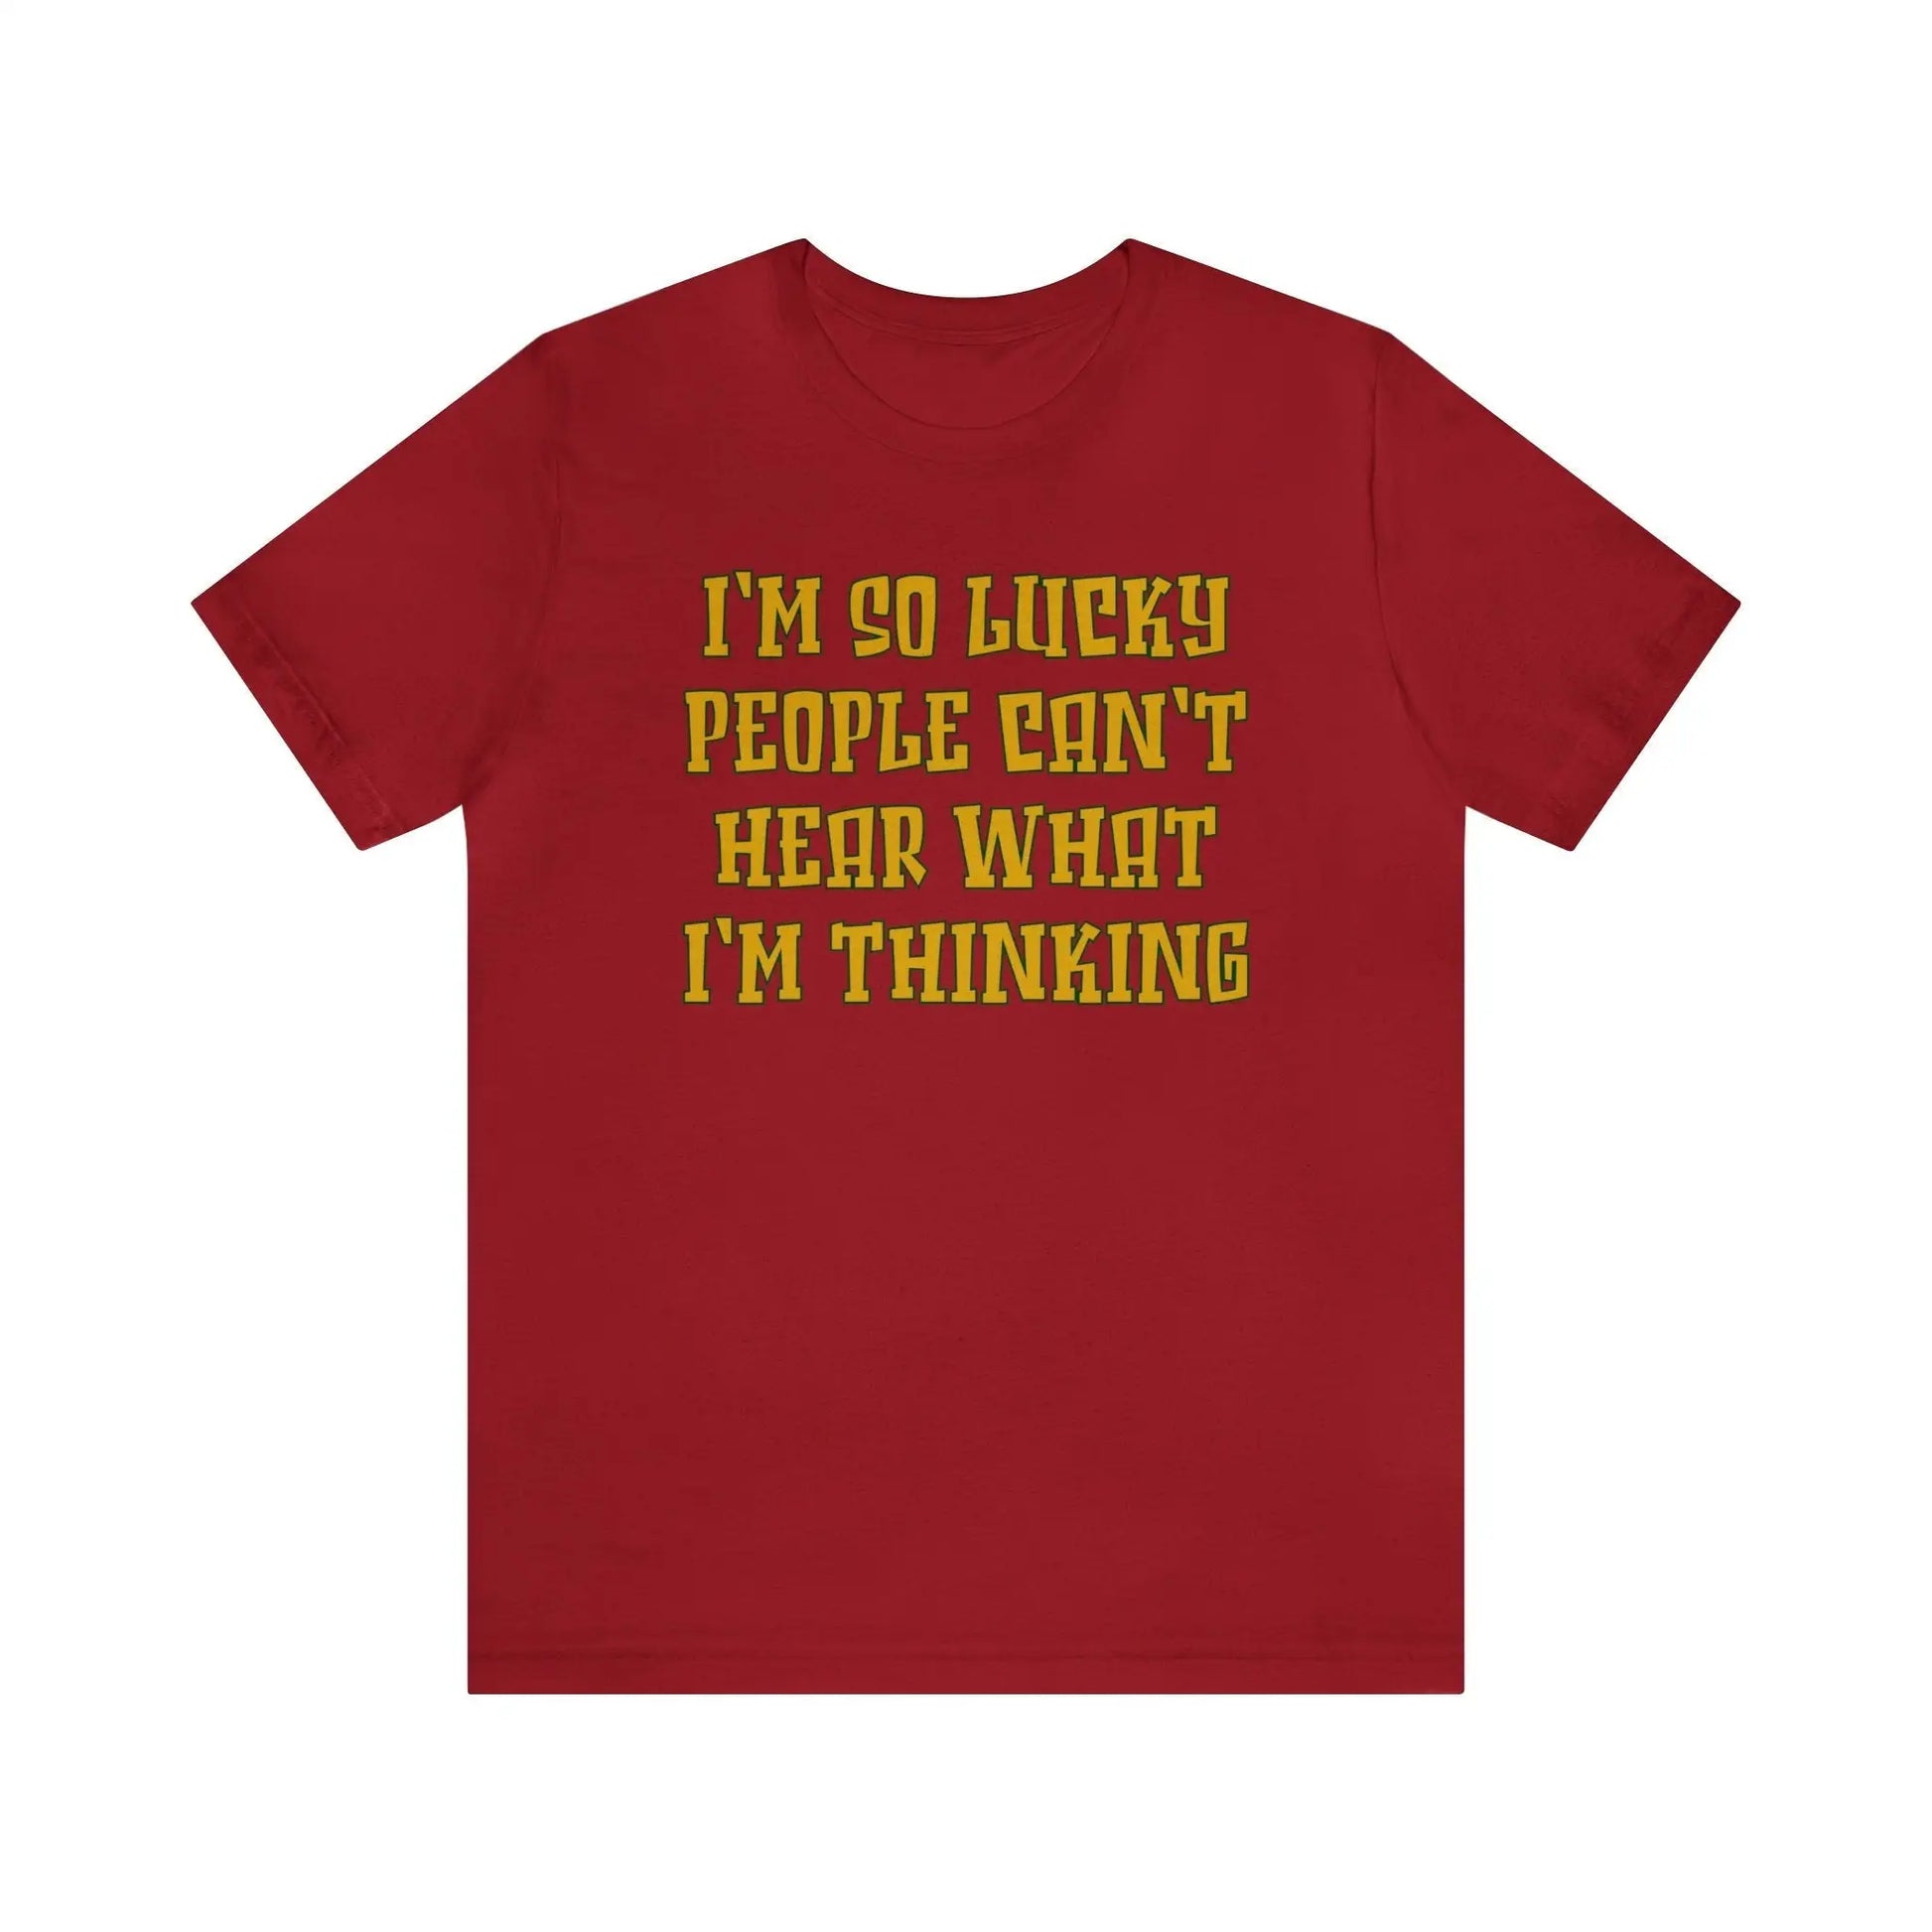 Can't Hear What I'm Thinking Men's Short Sleeve Tee - Wicked Tees